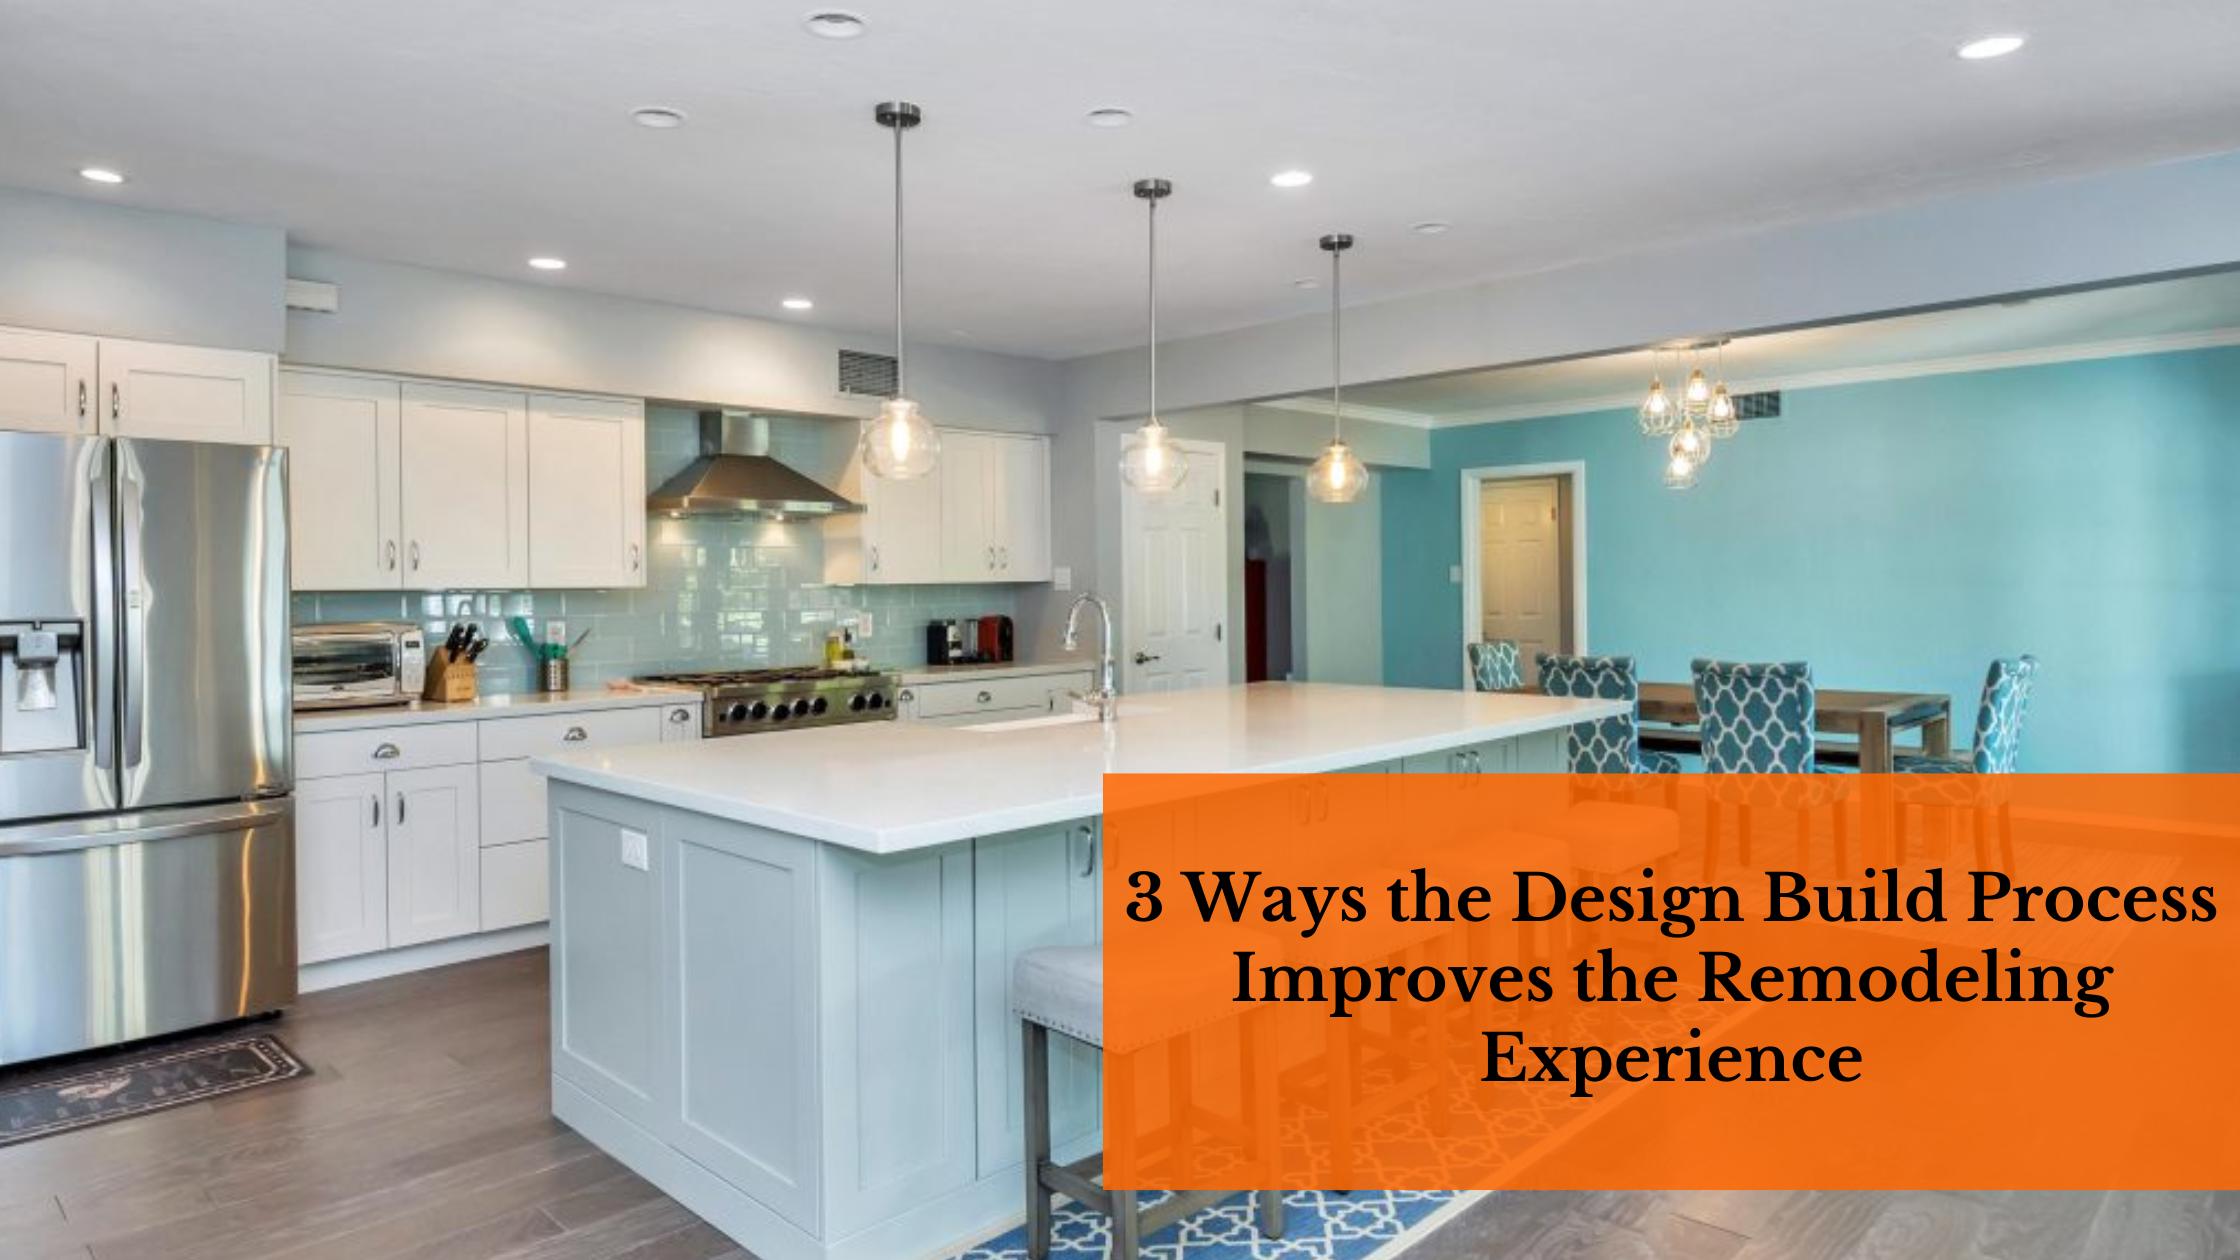 3 Ways the Design Build Process Improves The Remodeling Experience